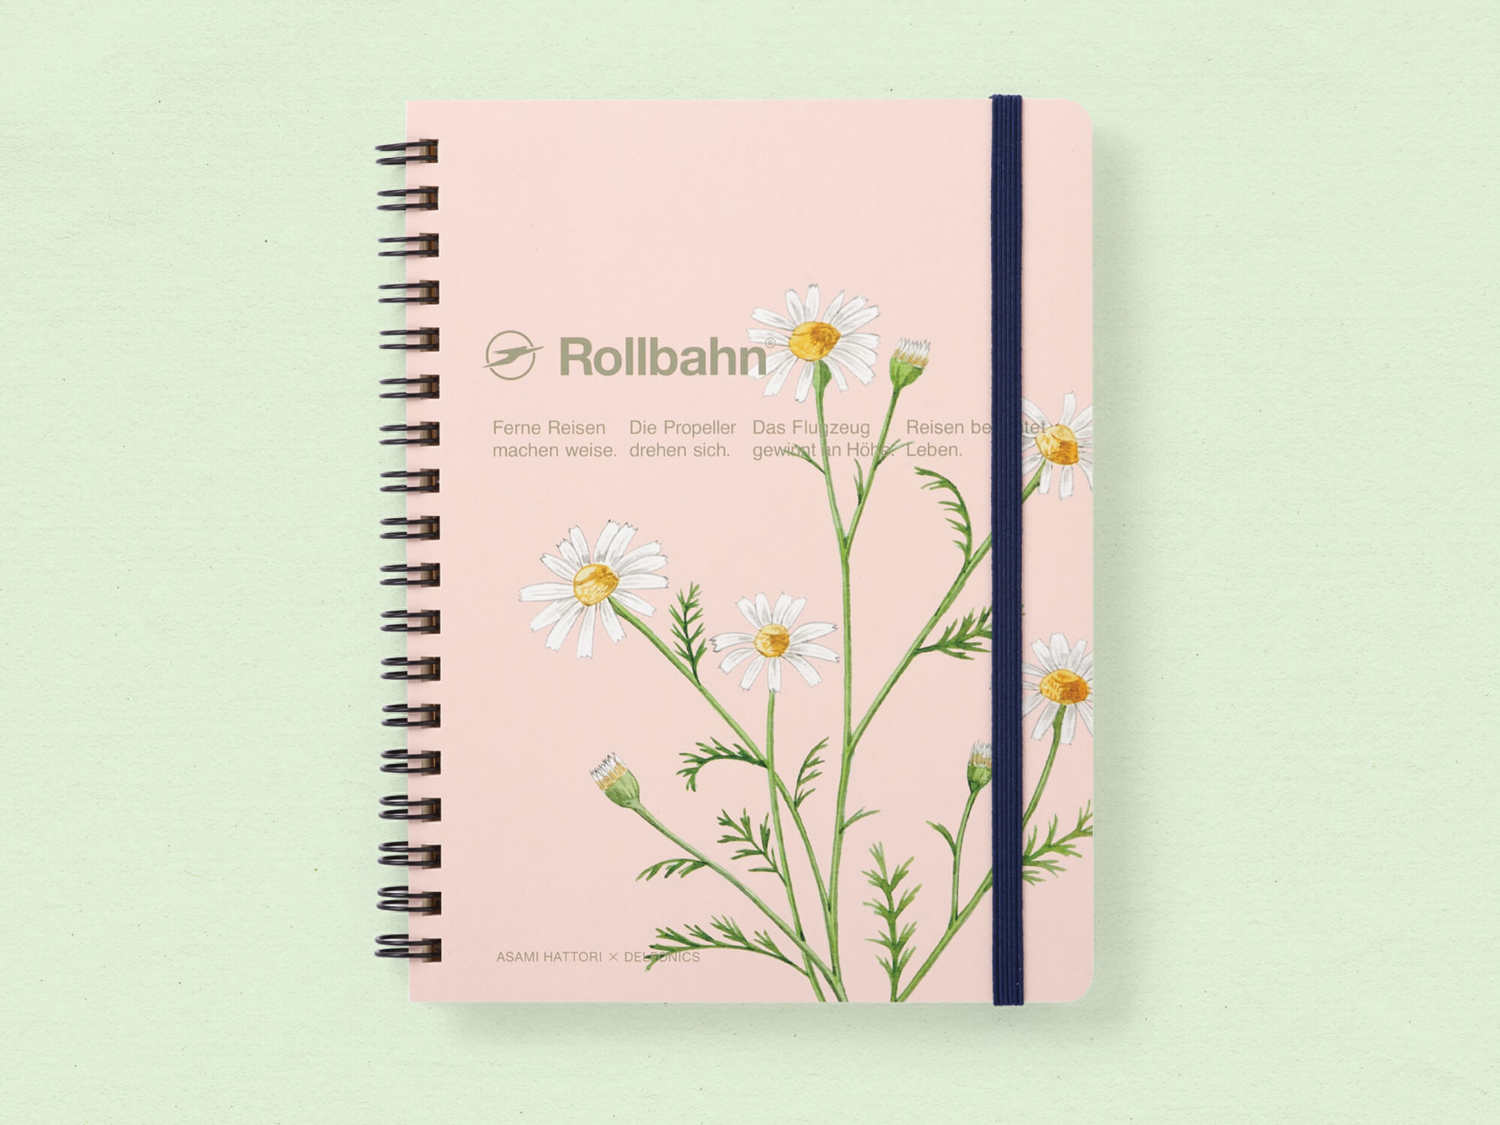 My Favorite Things - Rollbahn by 10 Artists 服部あさ美